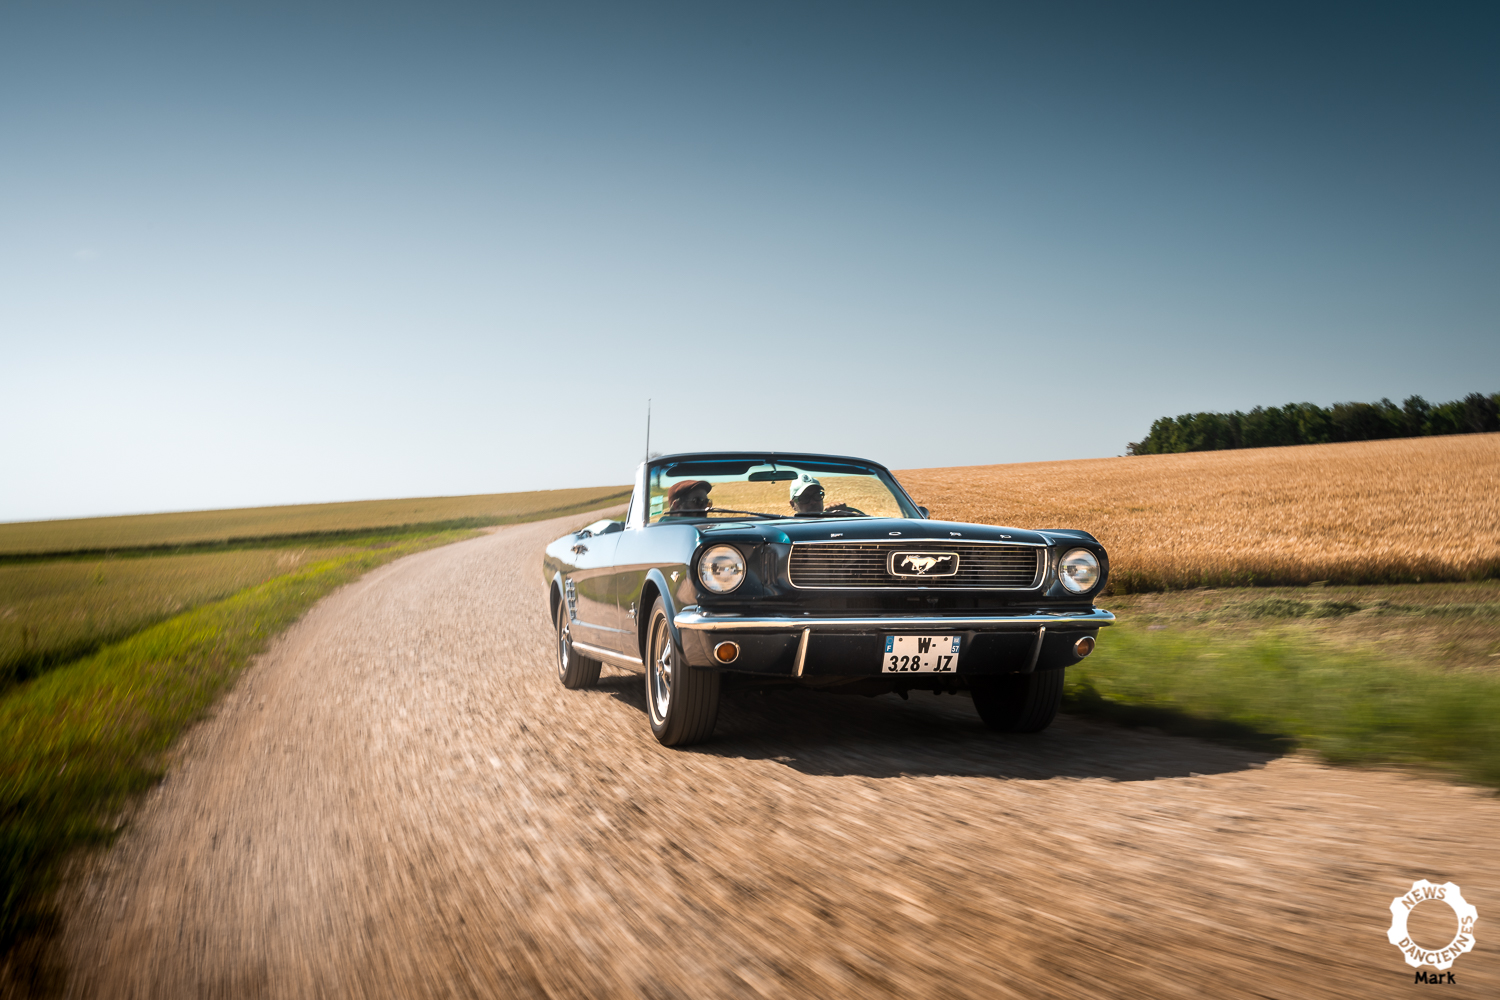 Essai d’une Ford Mustang Cabriolet, cruisin’ paradise !